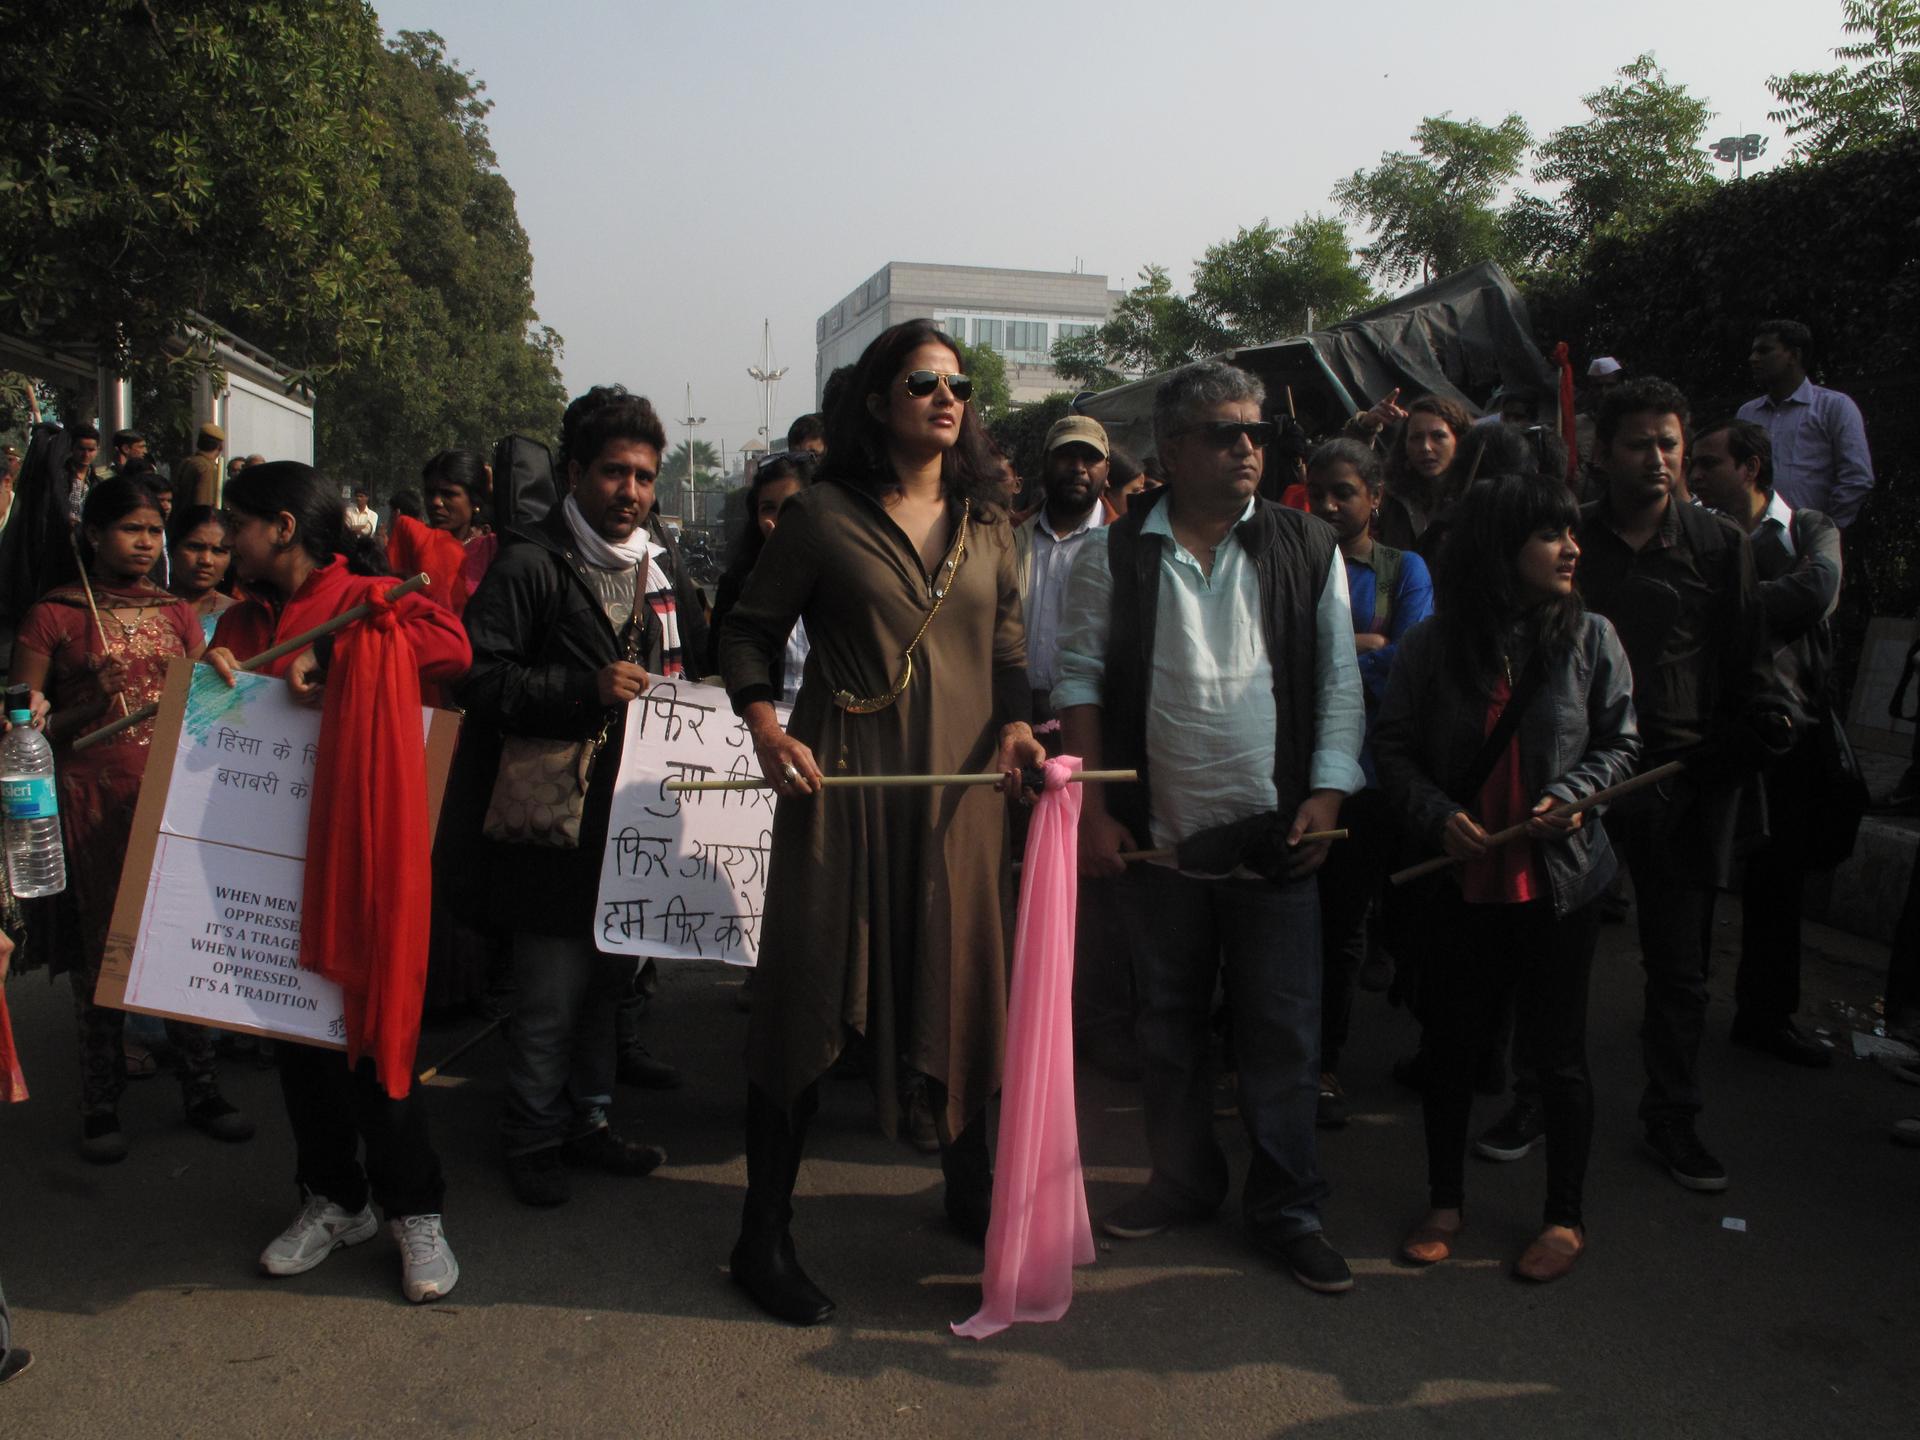 Pop singers Sona Mohapatra and Swanand Kirkire attending the rally